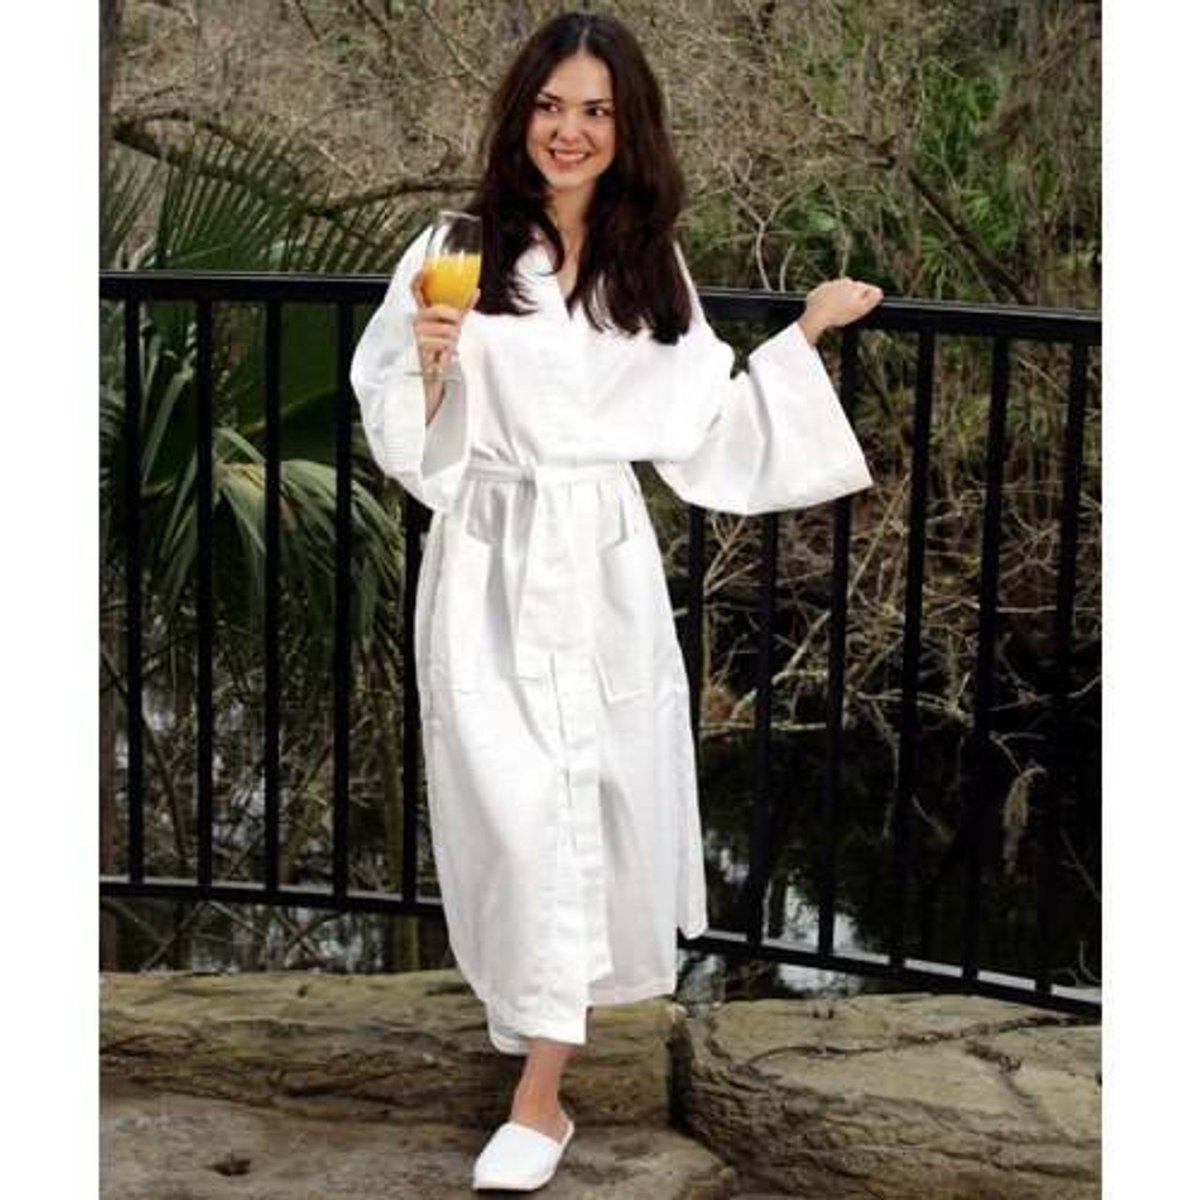 Give your guest an extra layer of warmth with a superb Bathrobe! See more at hotels4humanity.com/kimono-waffle-…! #hotel #bedsheet #luxuryhotel #hotelroom #hotelbedding #towels #pillowcase #mattress #phoenixdownpillows #adornbedpillows #hotelsupplyshop #T300sheets